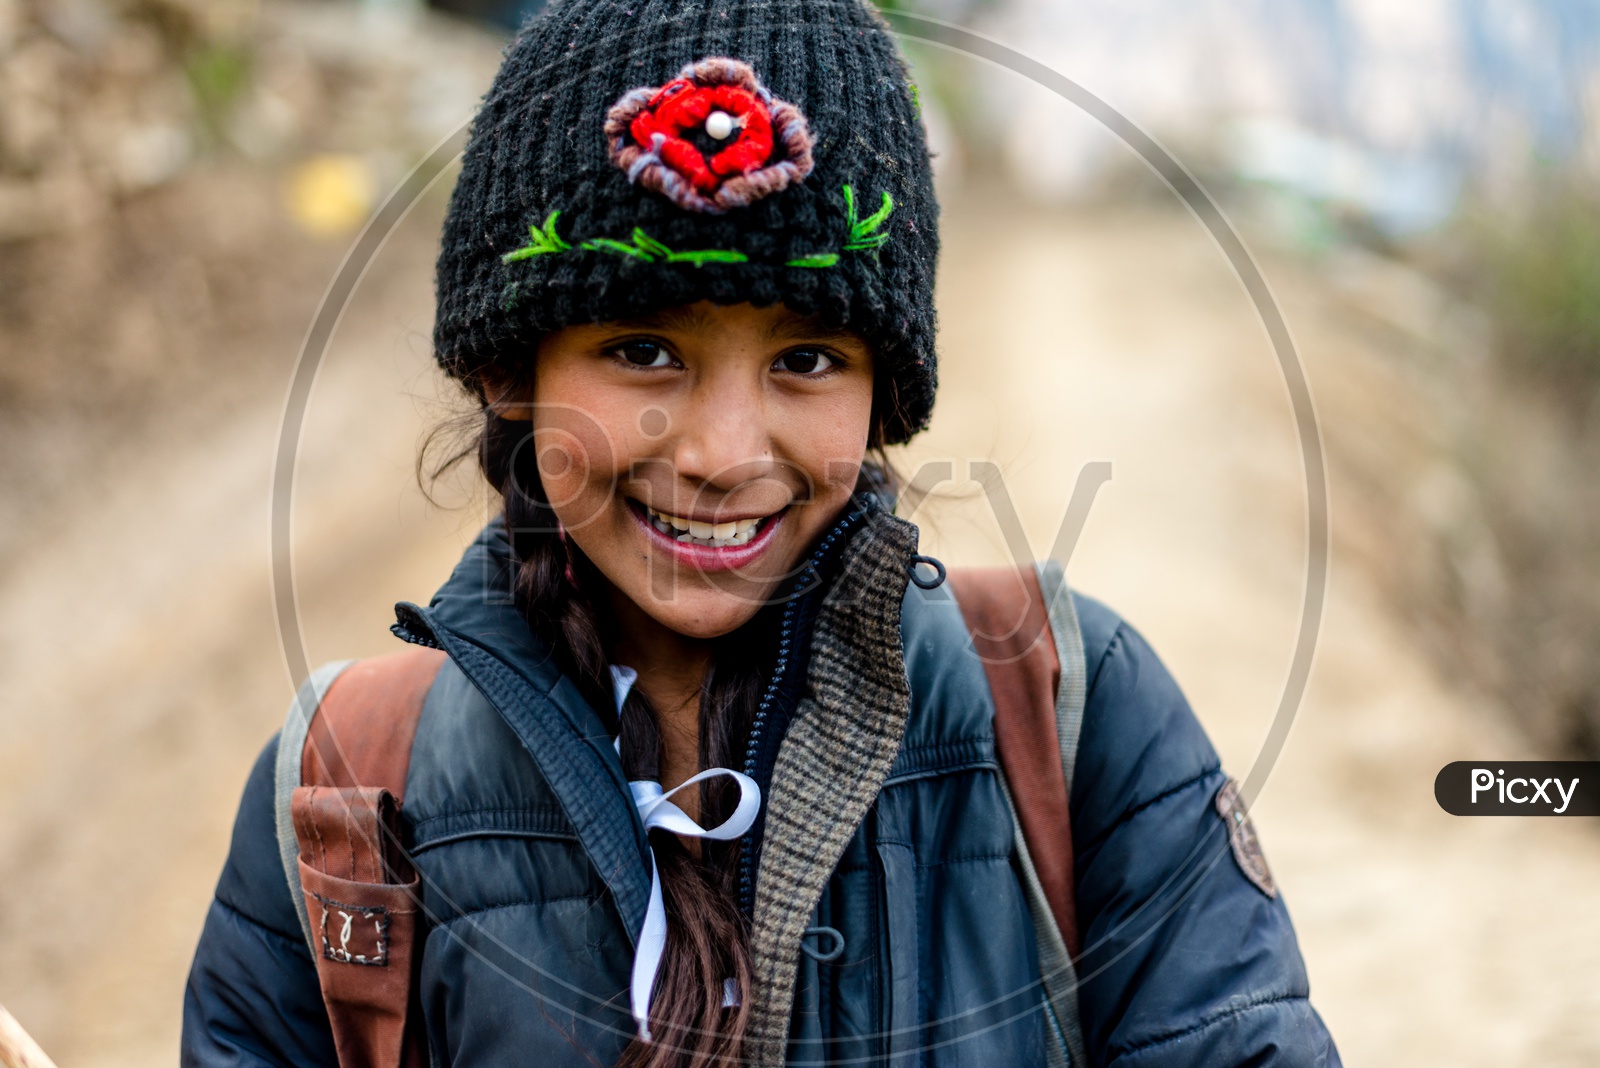 Portrait of Himalayan girl with Cap on Head